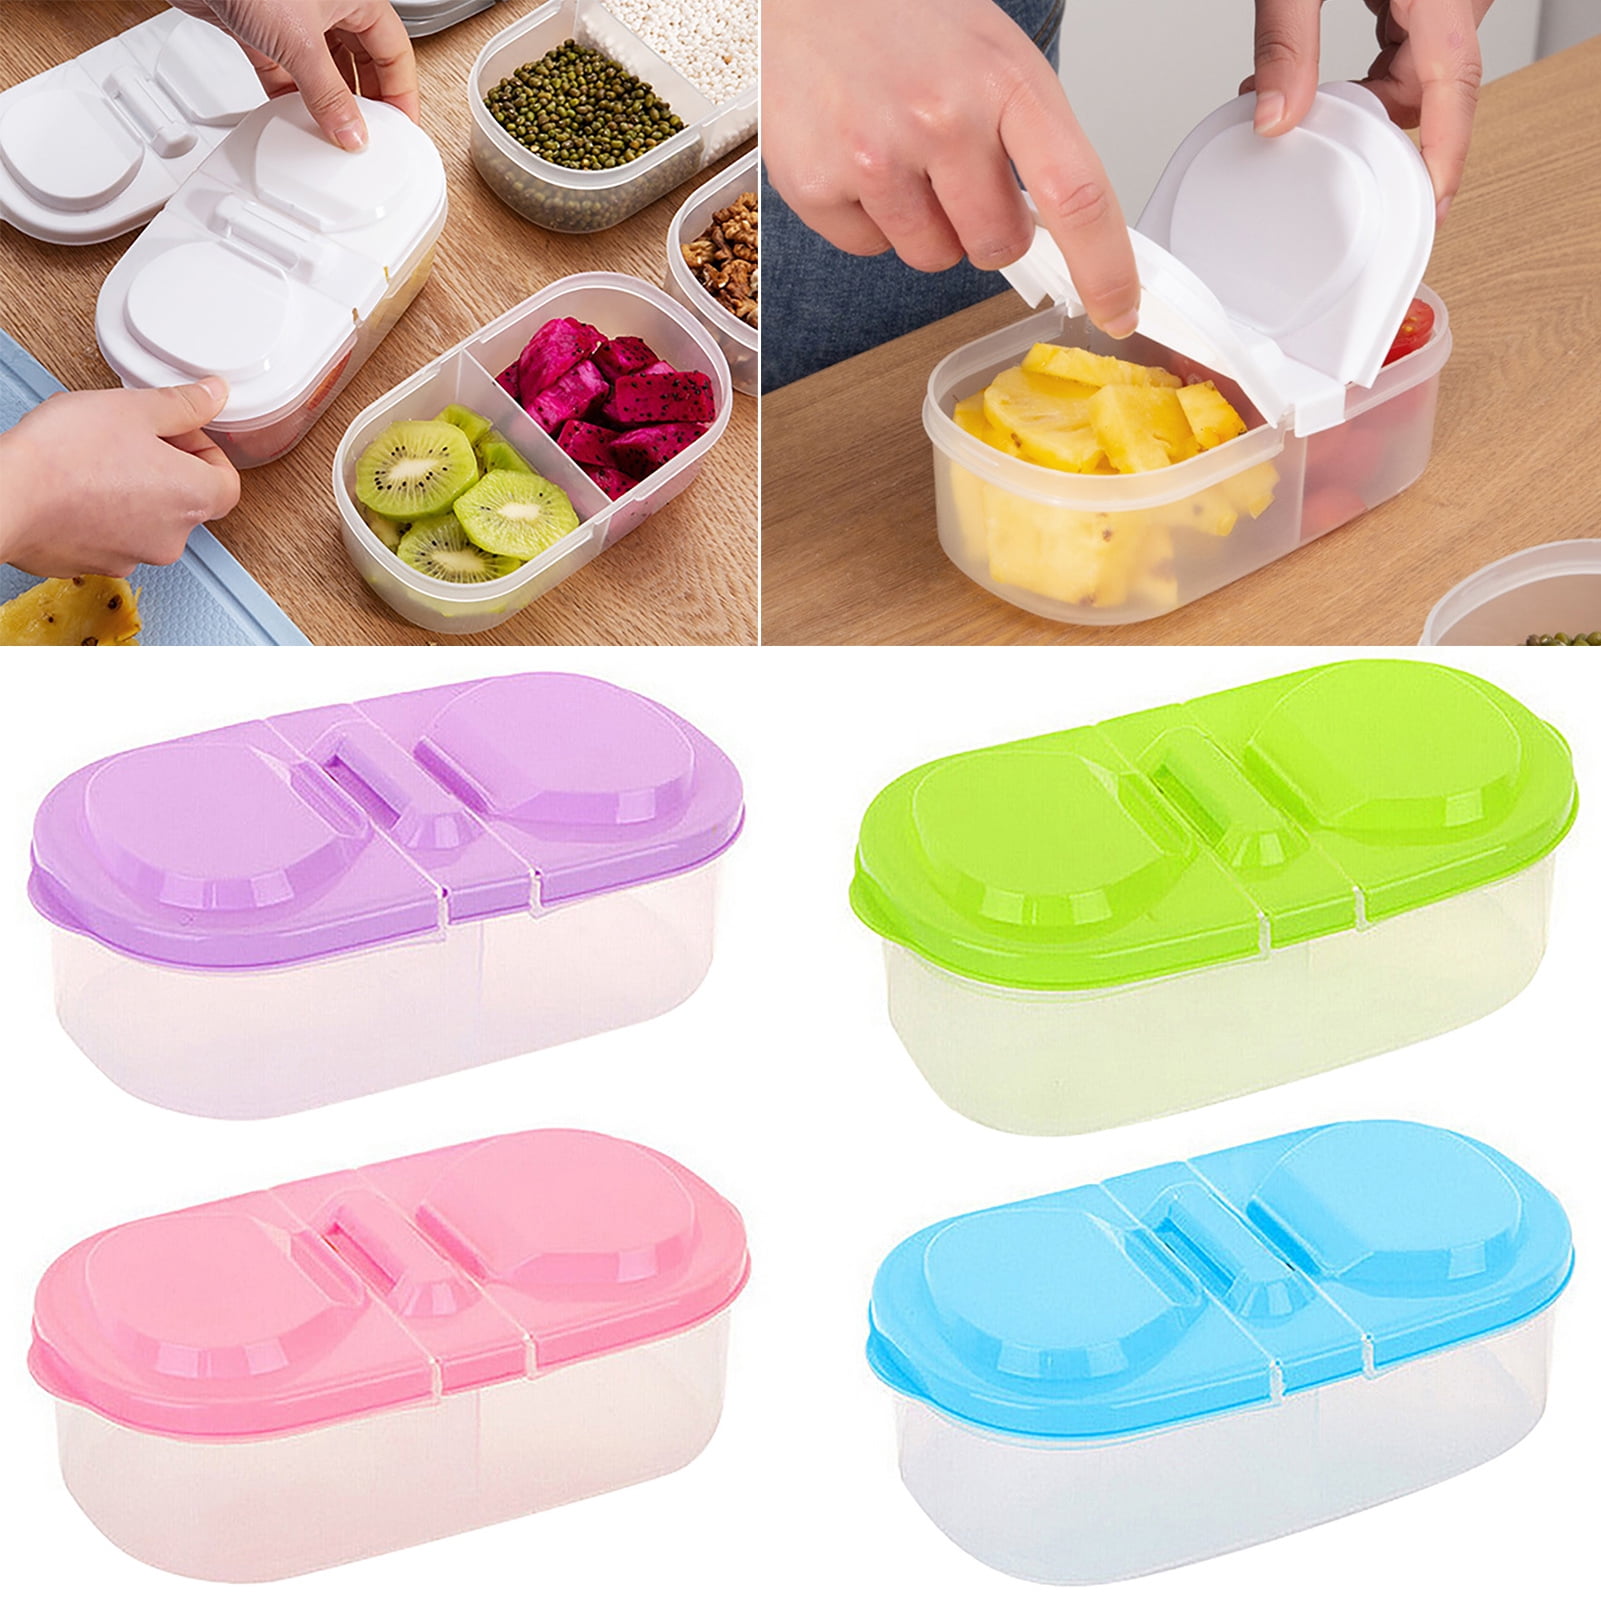 Small Food Storage Container Plastic 2-compartment Food Organizer Box with  Lid, Portable Bento Box Meal Prep Container